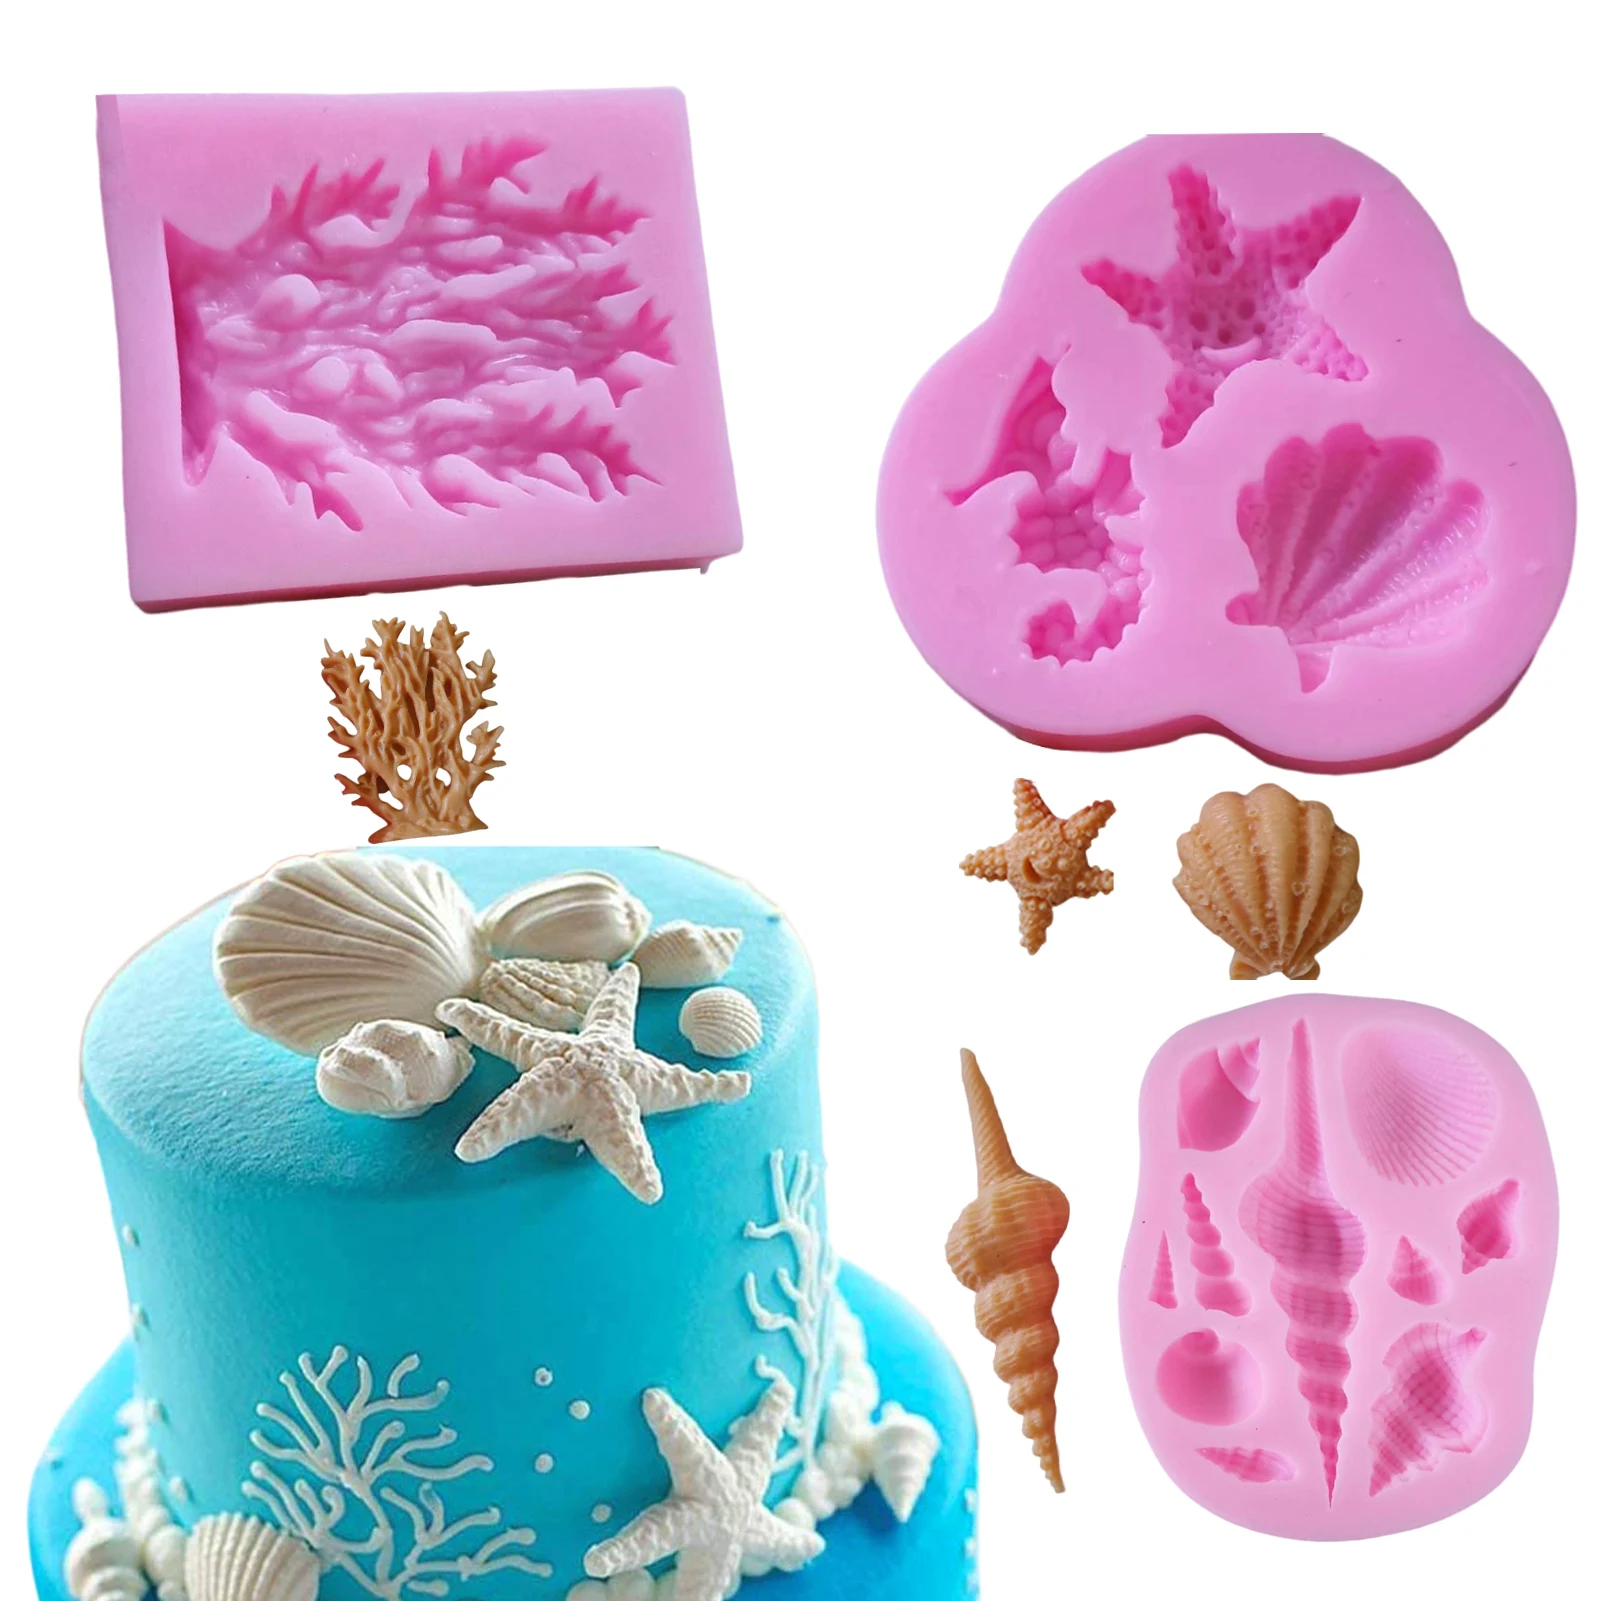 

3pcs Silicone Fondant Molds Tail Shape Baking Tools Funny Candy Seashell DIY Cakes Homemade Marine Themed For Decorating